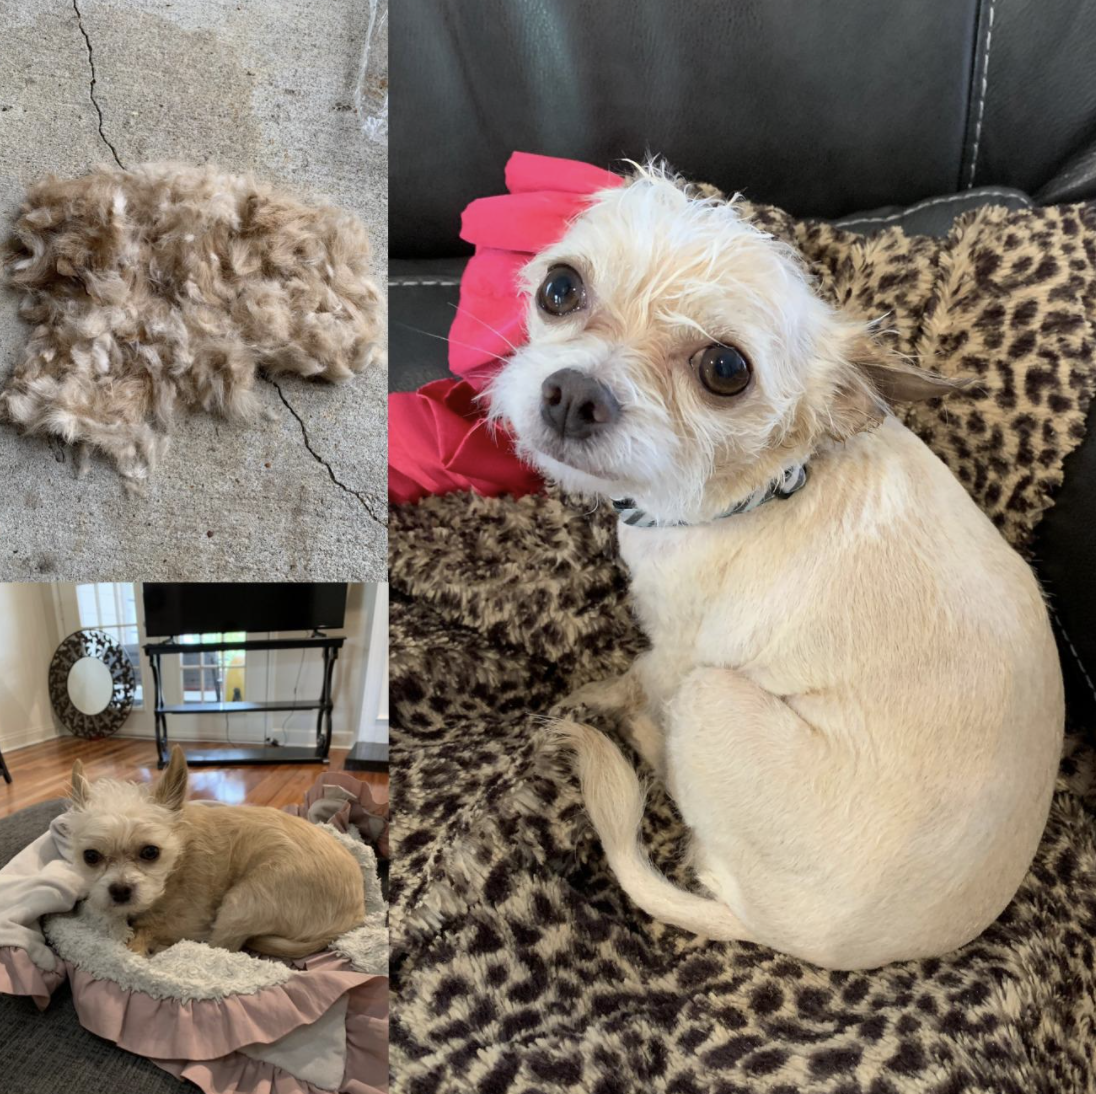 A series of customer review photos showing disheveled dog looking neat and groomed